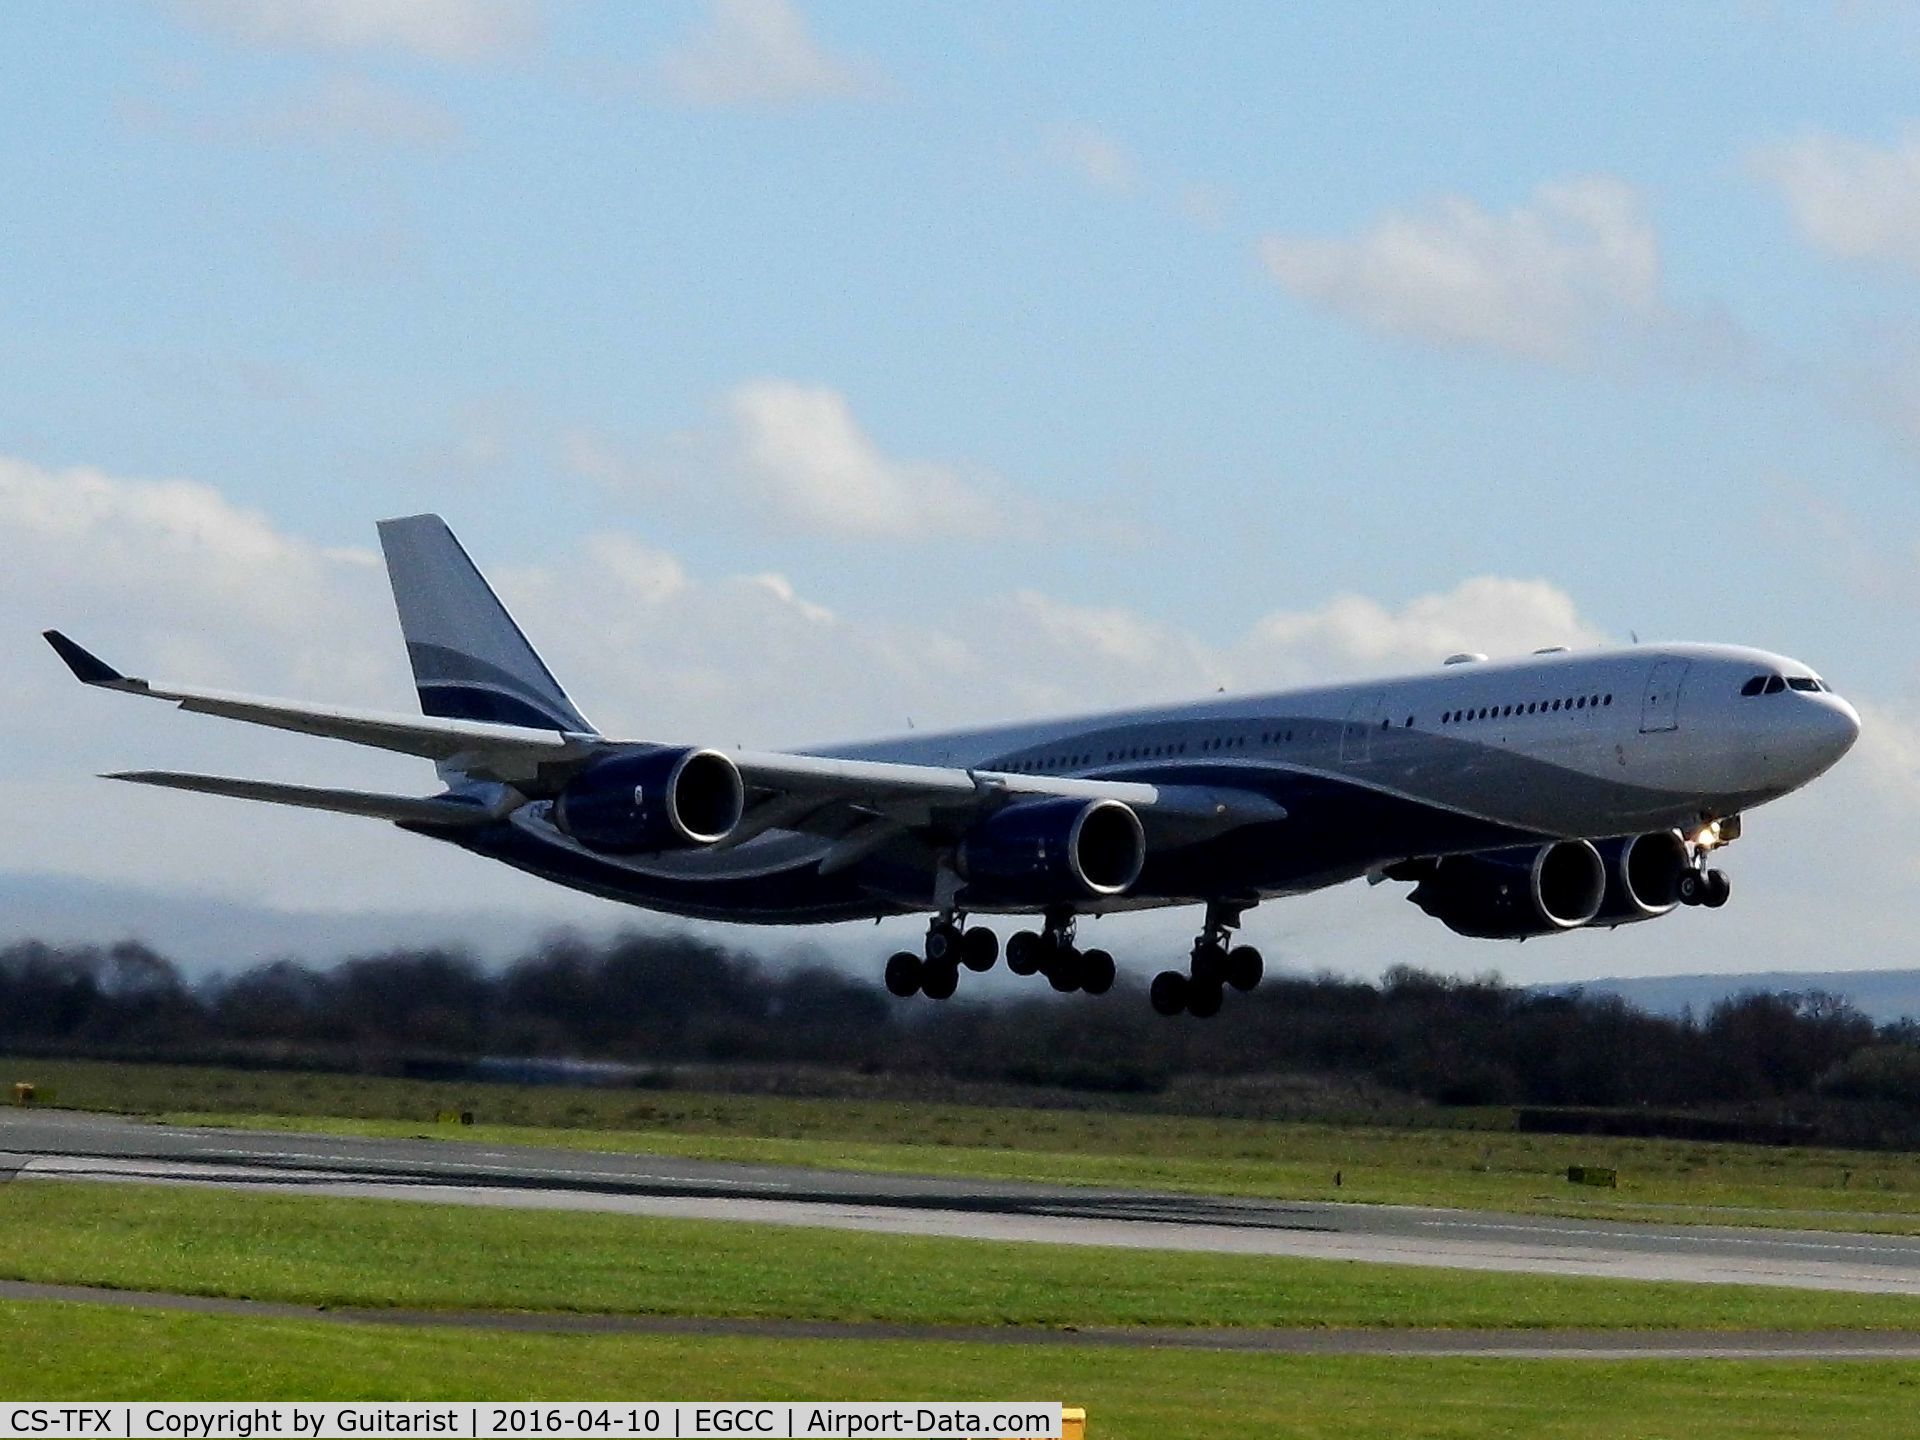 CS-TFX, 2008 Airbus A340-541 C/N 912, At Manchester